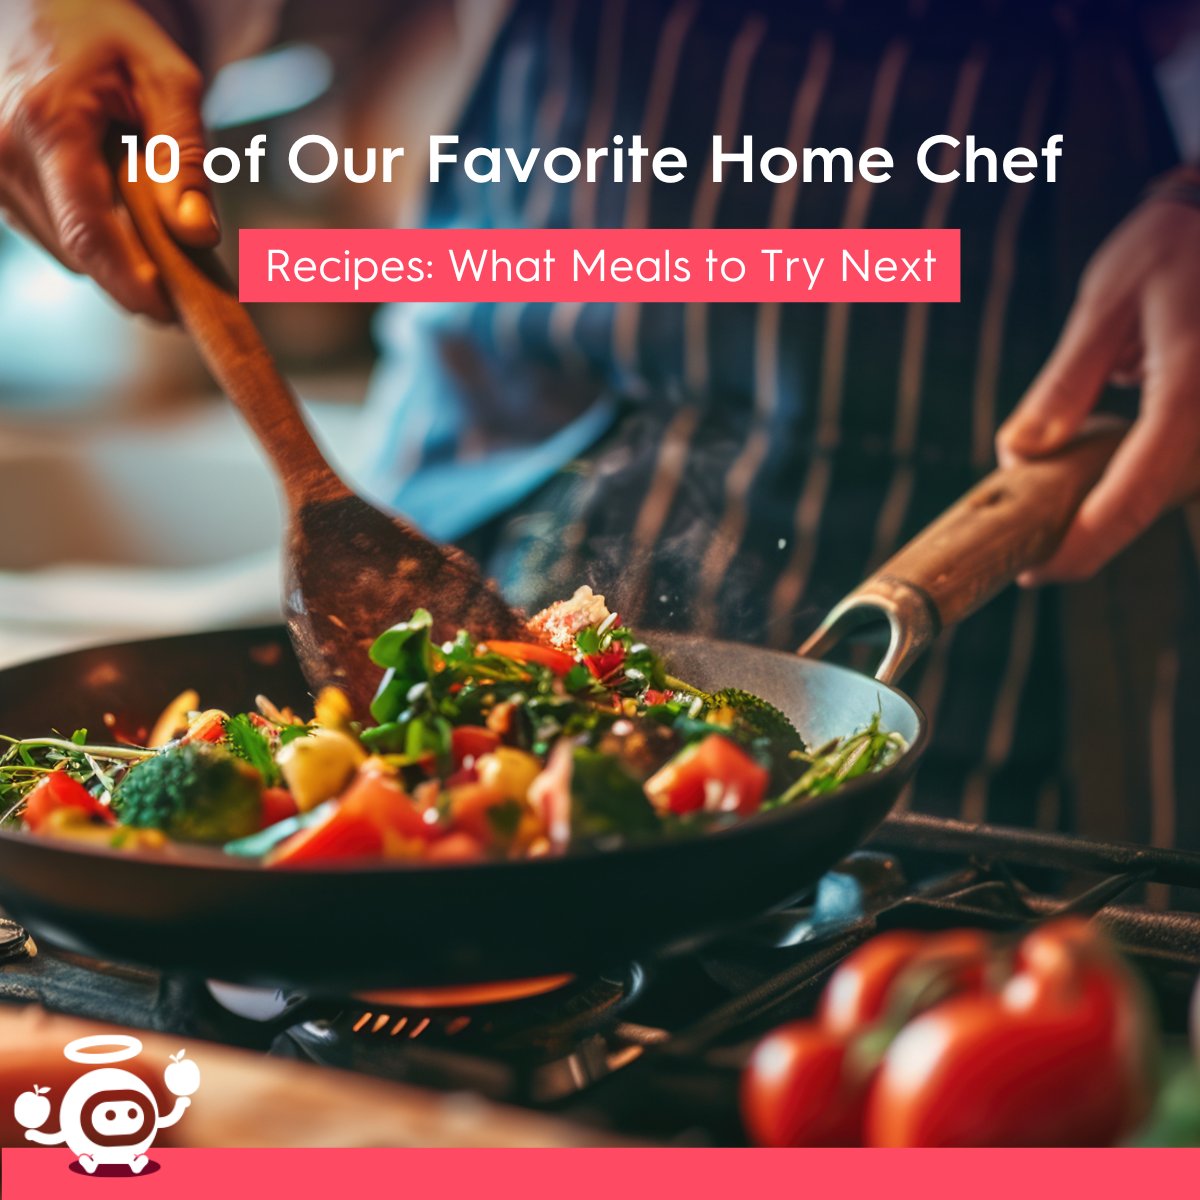 Finding it hard to keep up with your ideal healthy eating habits? Check out our expert's 10 favorite Home Chef recipes: bit.ly/4d2d6Xe #healthylifestyle #HealthyEating #HelloFresh